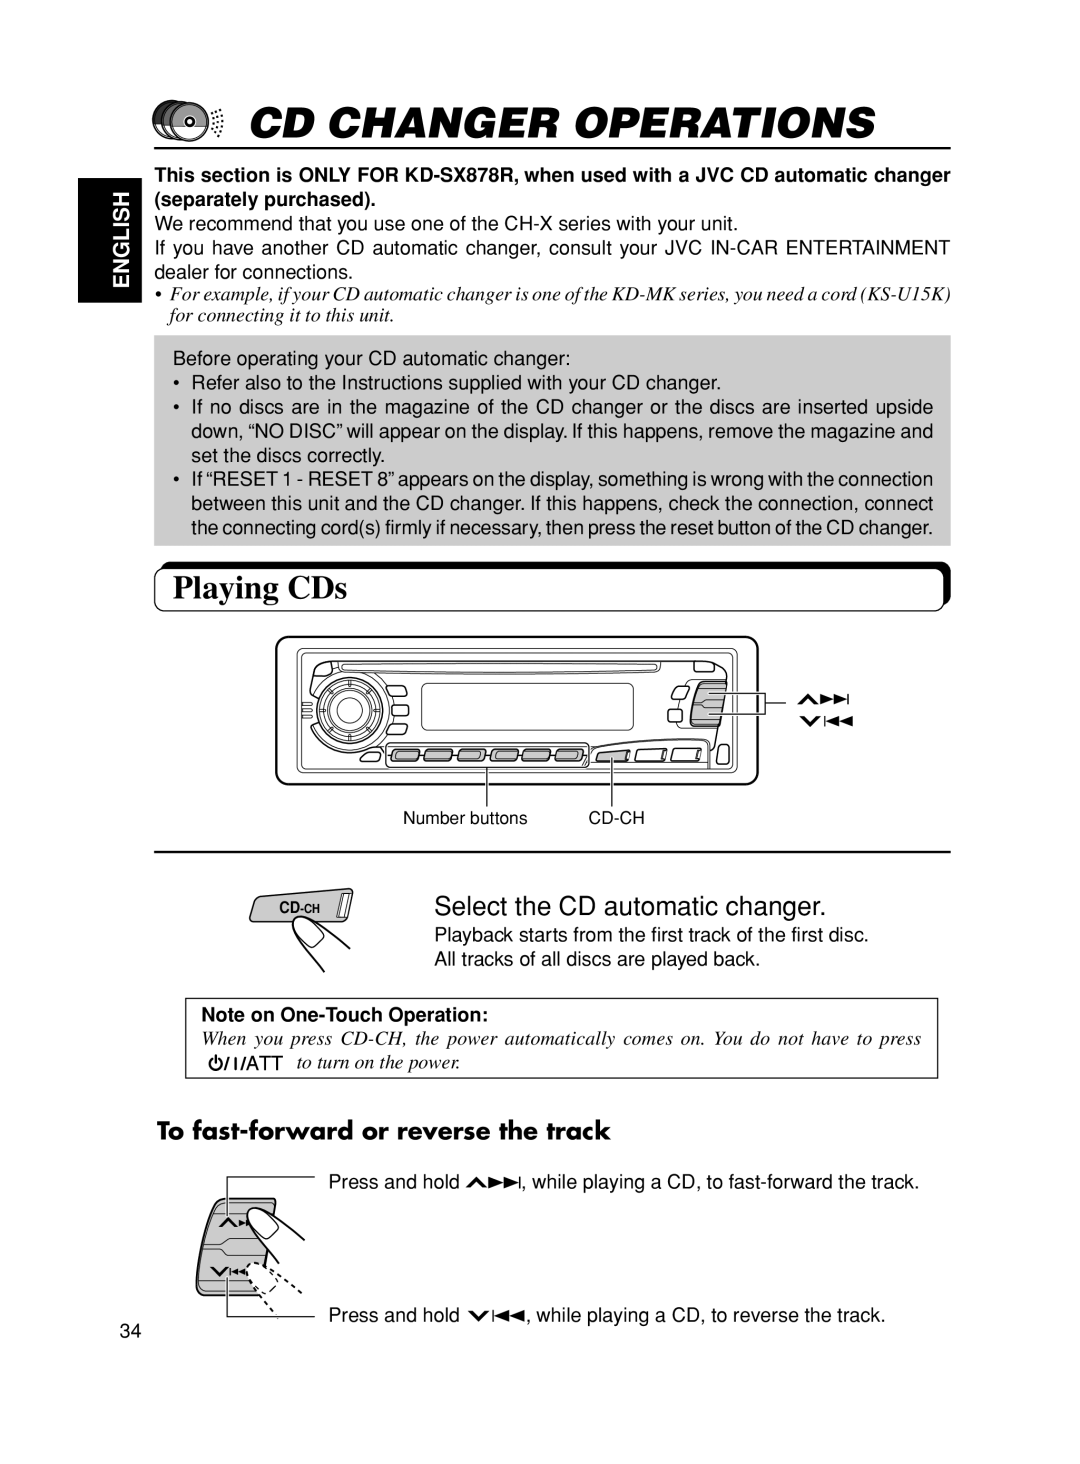 JVC KD-S777R Cd Changer Operations, Playing CDs, To fast-forwardor reverse the track, English, Note on One-TouchOperation 